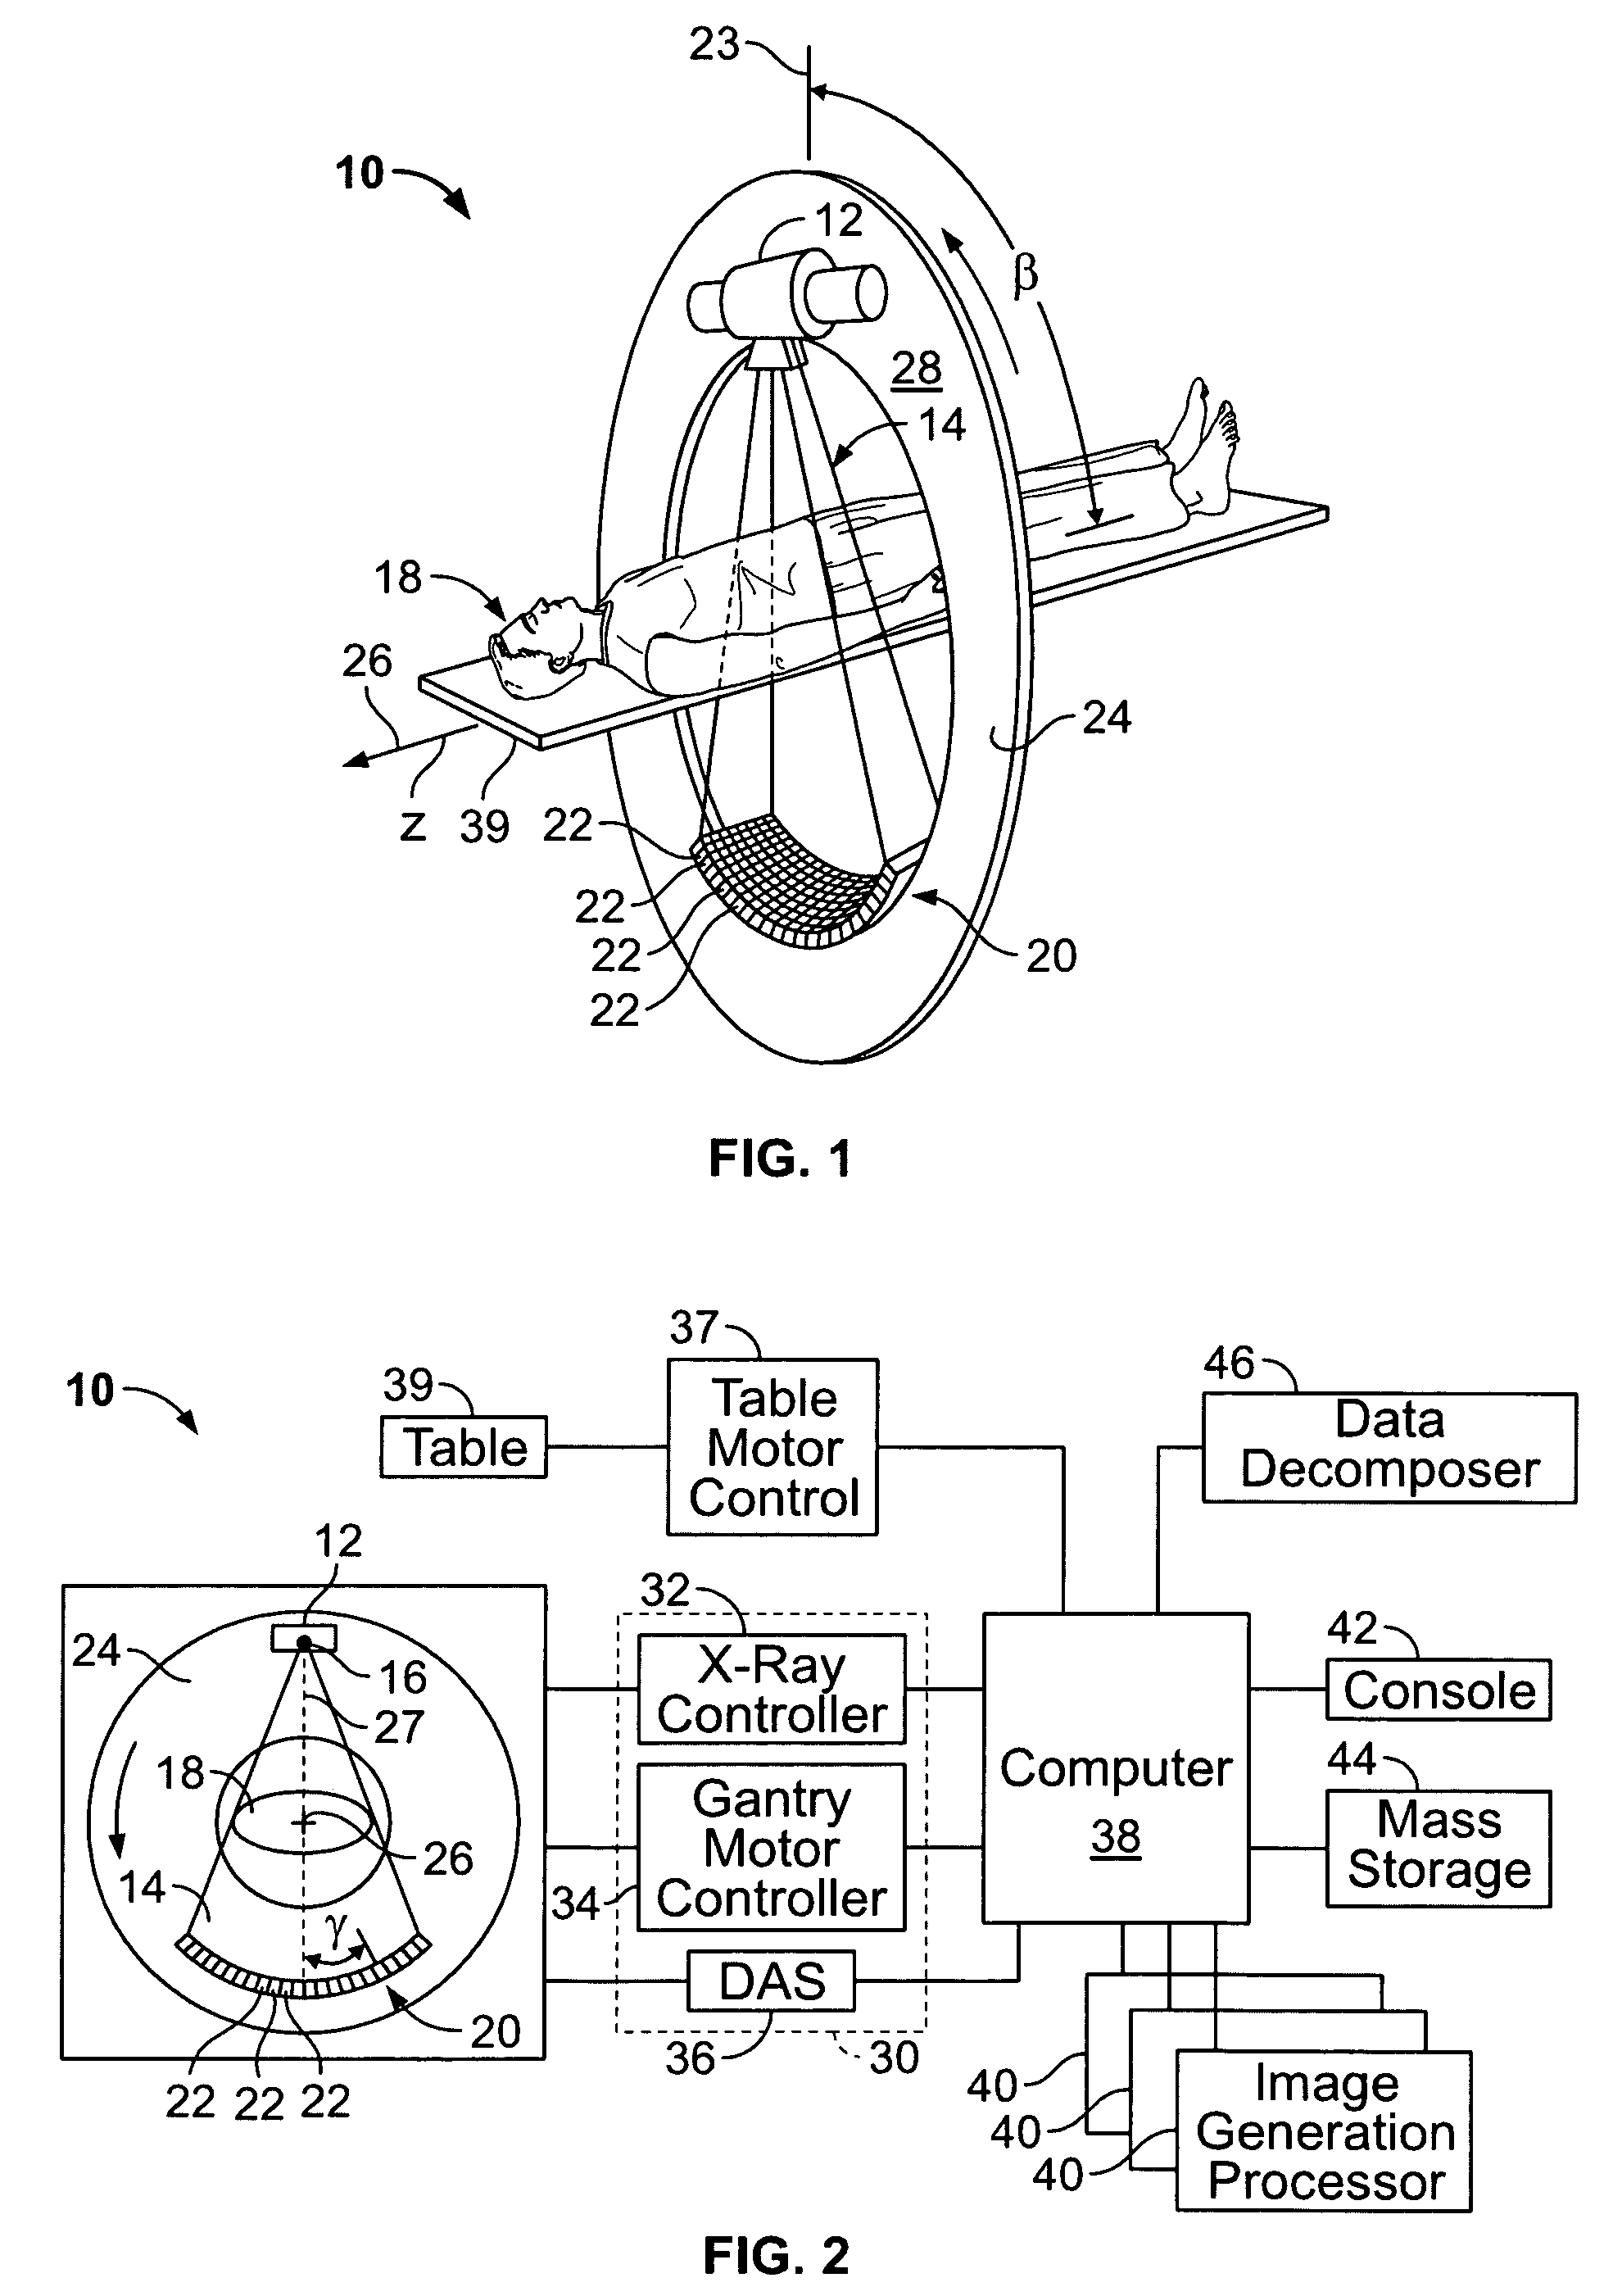 Method and apparatus for image reconstruction using data decomposition for all or portions of the processing flow